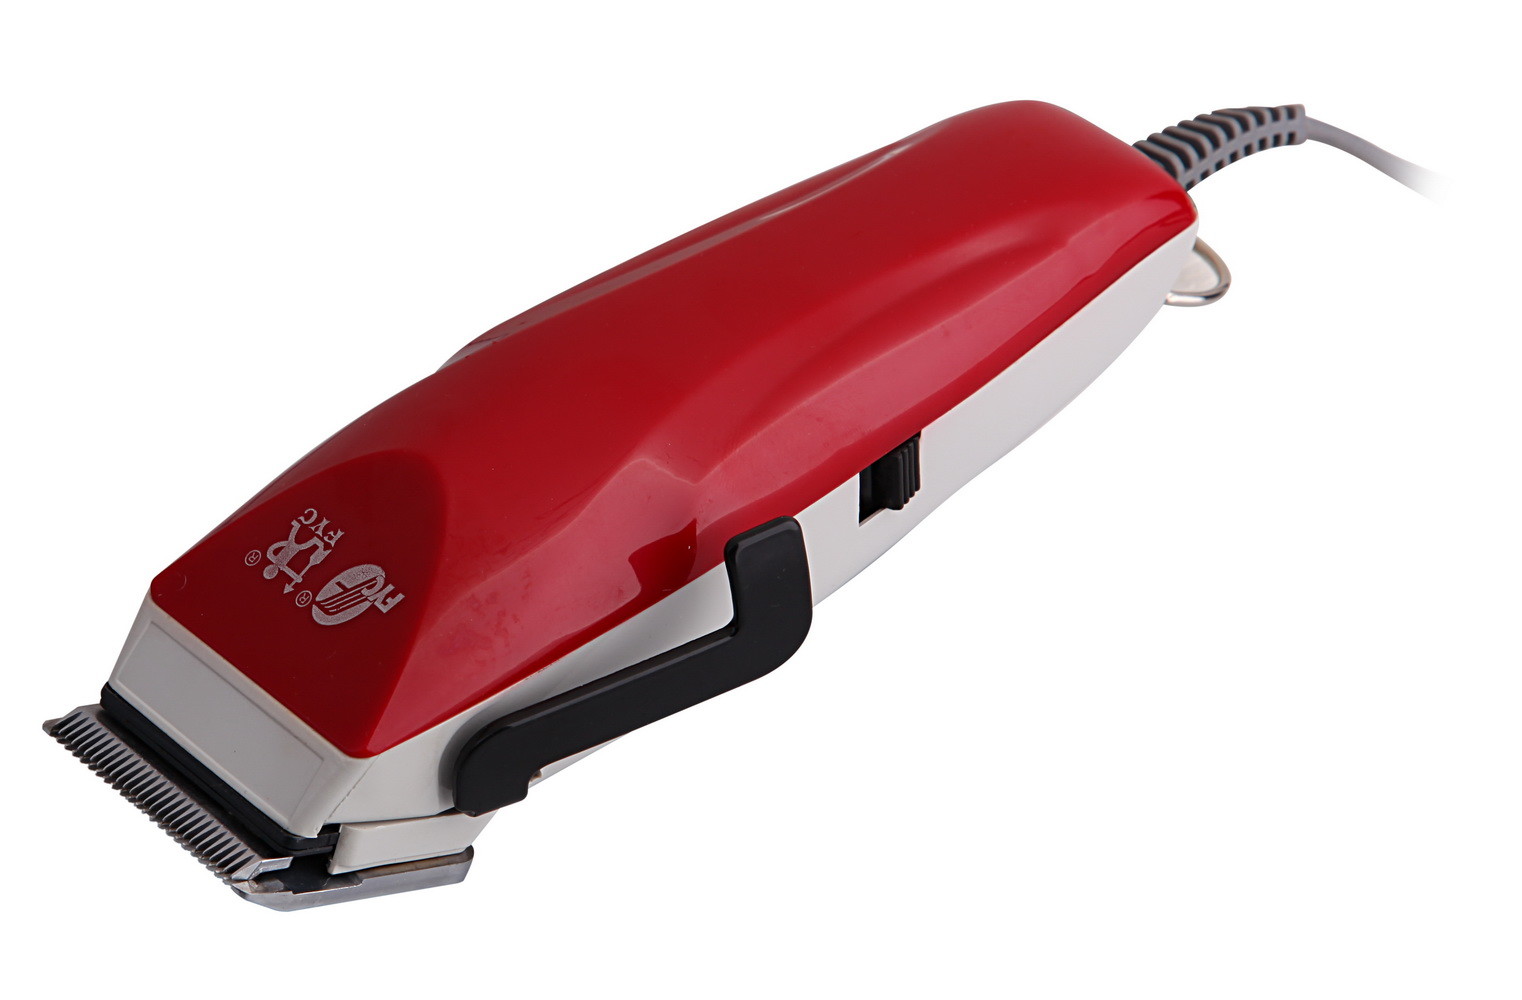 Magic Shine Ionic Steam Travel Hair Clippers PTC Heating Element One Year Warranty